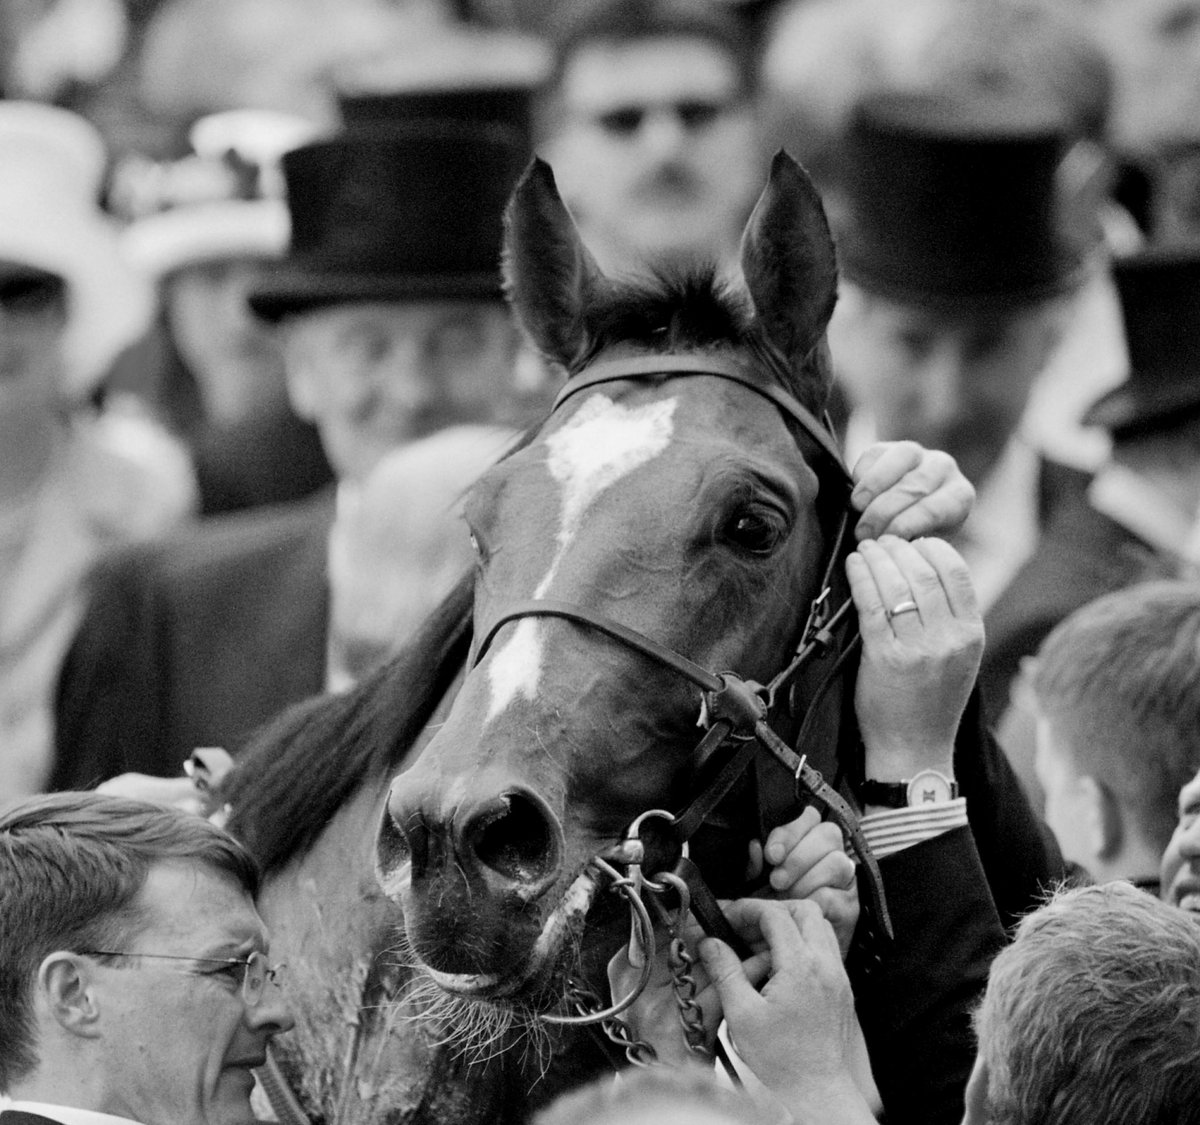 The saddest day but a life to celebrate. The General Stud Book has chronicled the exploits of Thoroughbred stallions for over 250 years. Galileo will forever stand amongst the greatest of them. Our condolences to all @coolmorestud and everyone involved with the legendary stallion